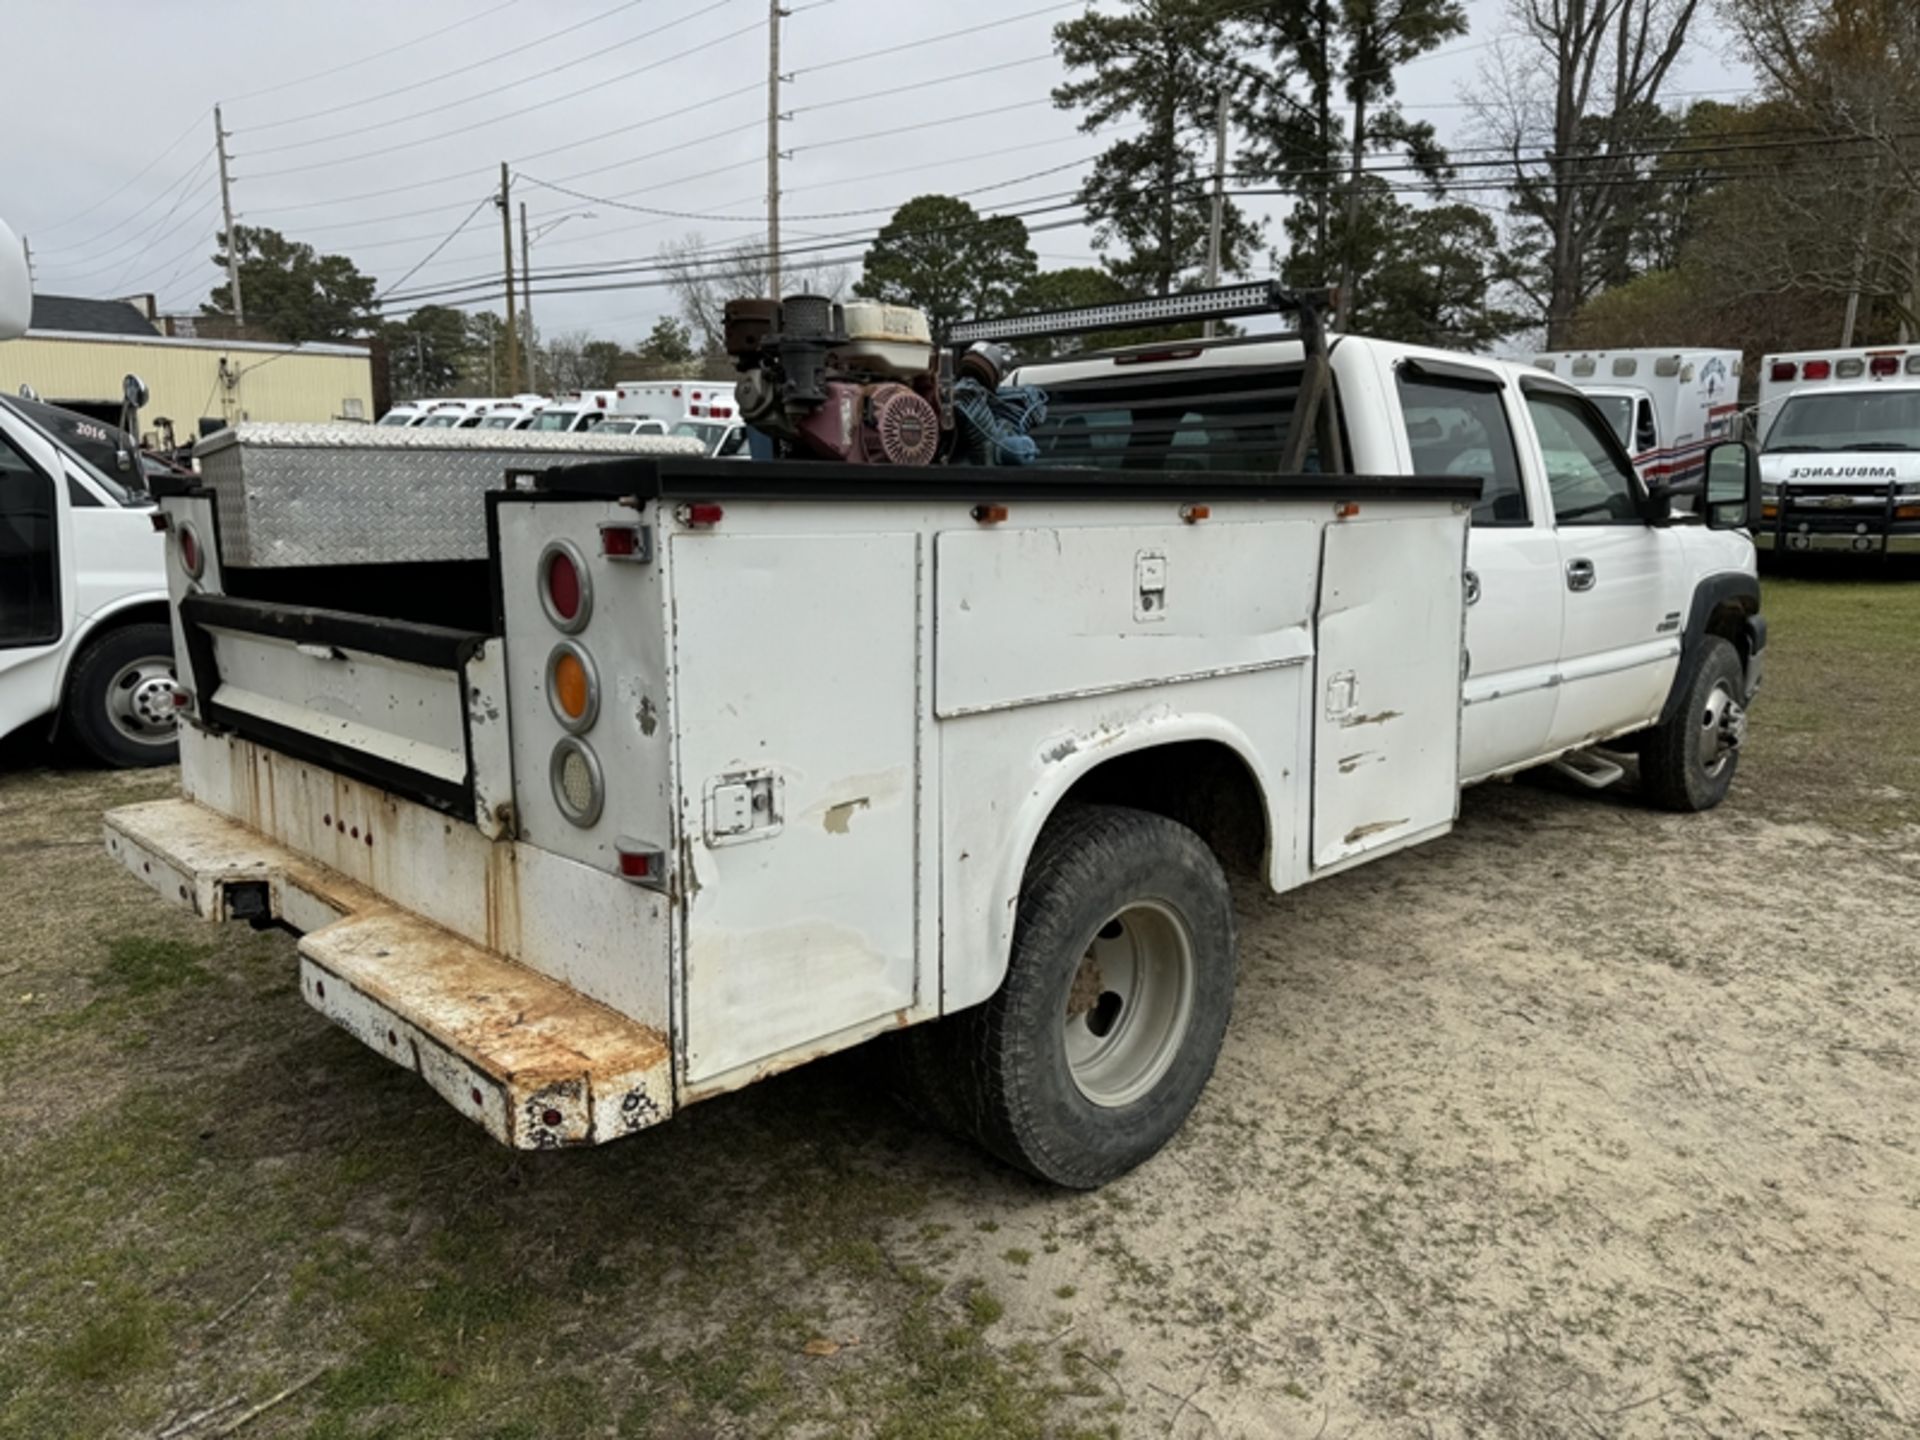 2006 CHEVROLET 3500 dually utility truck with air compressor - 320,838 miles showing - - Image 3 of 7